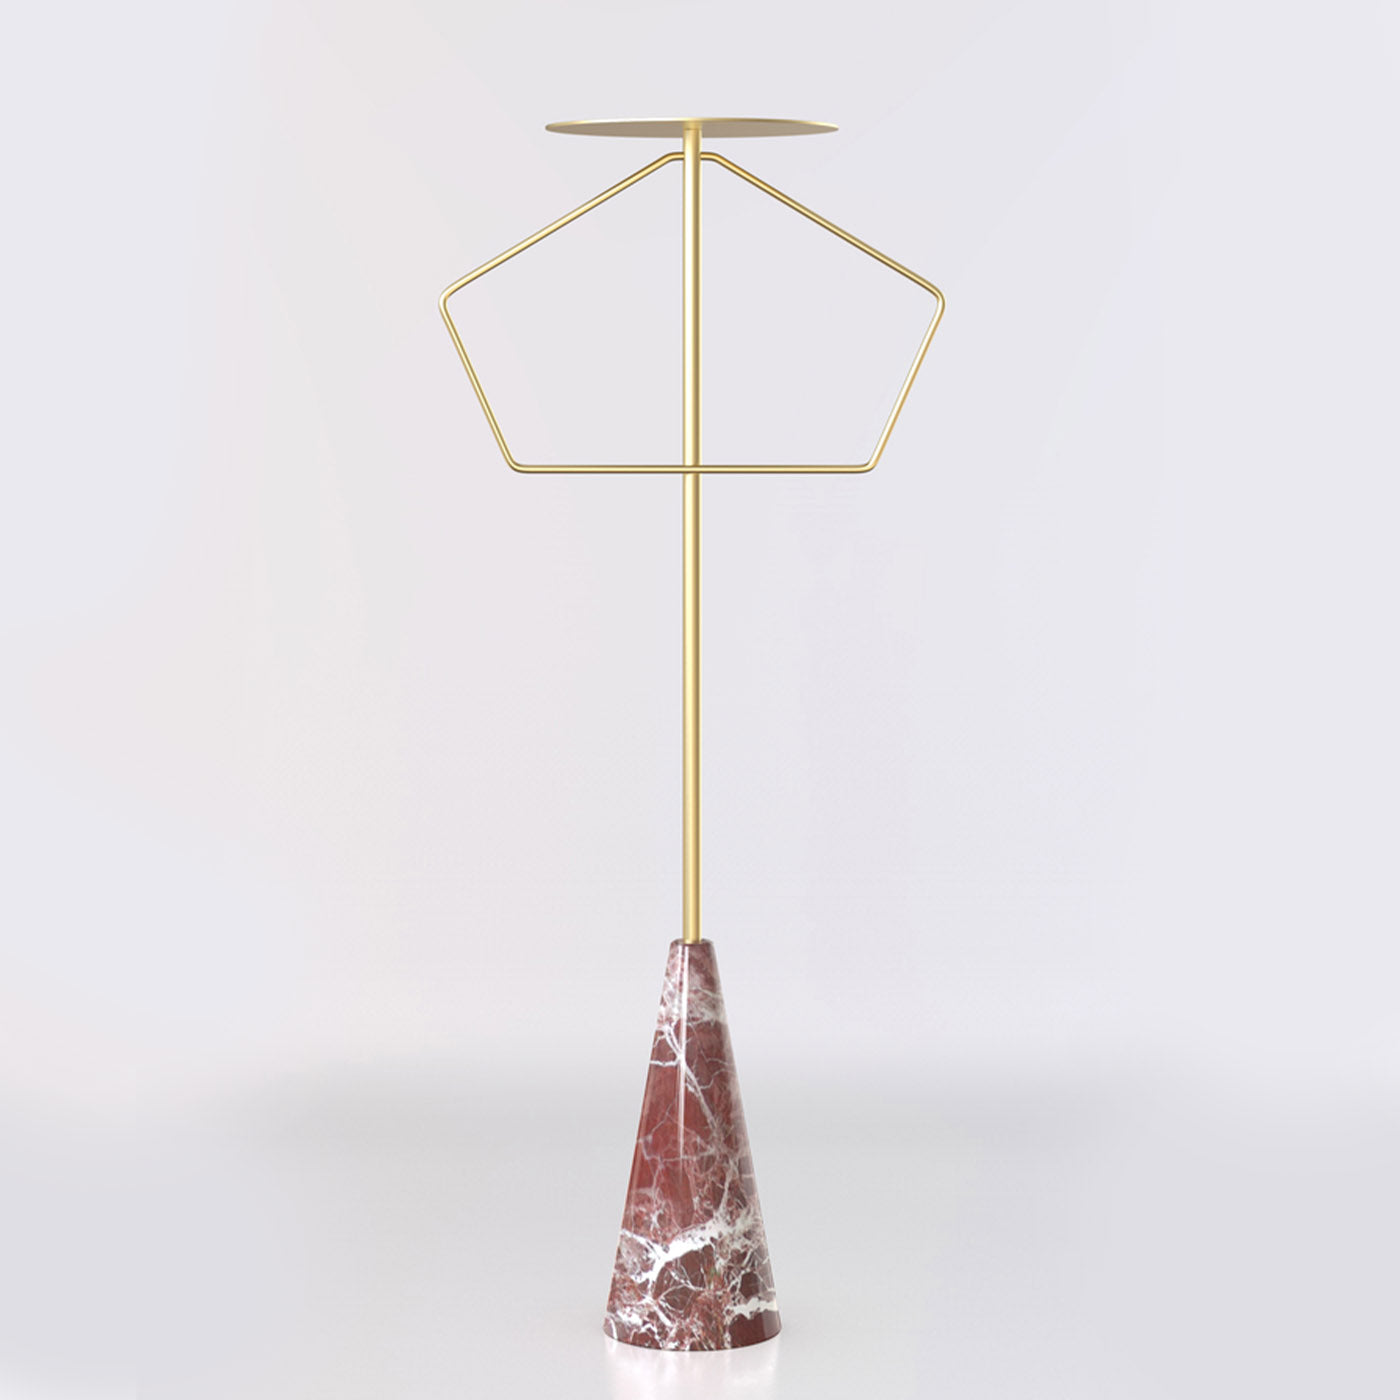 ED044 Red Stone and Brass Floor Lamp - Alternative view 2